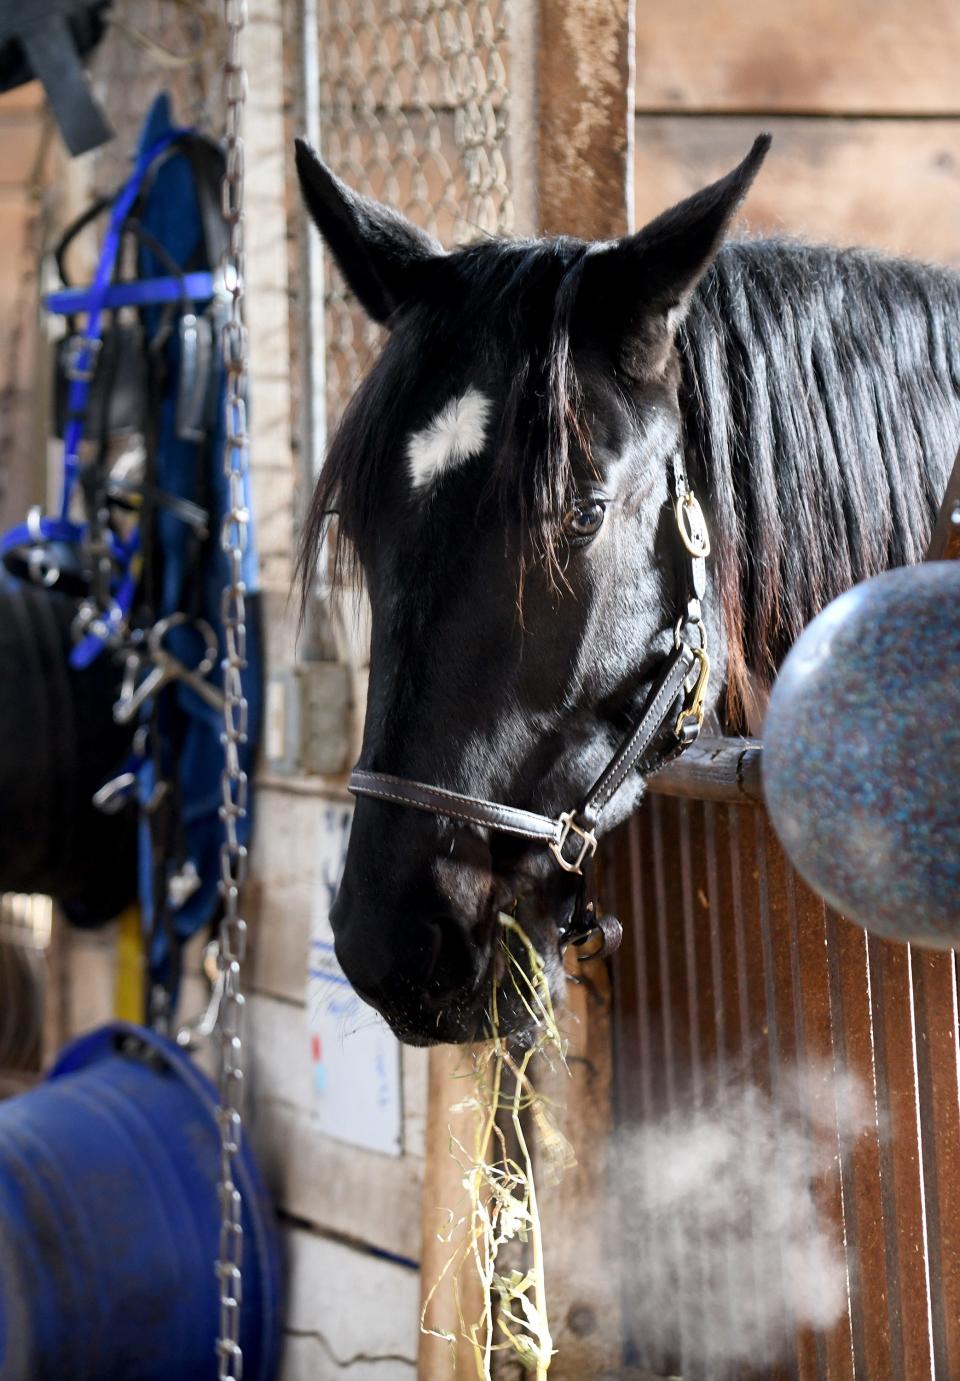 Intense Storm, whose nickname is Hagrid, is shown at Harvey Stable at the Stark County Fairgrounds in Canton.